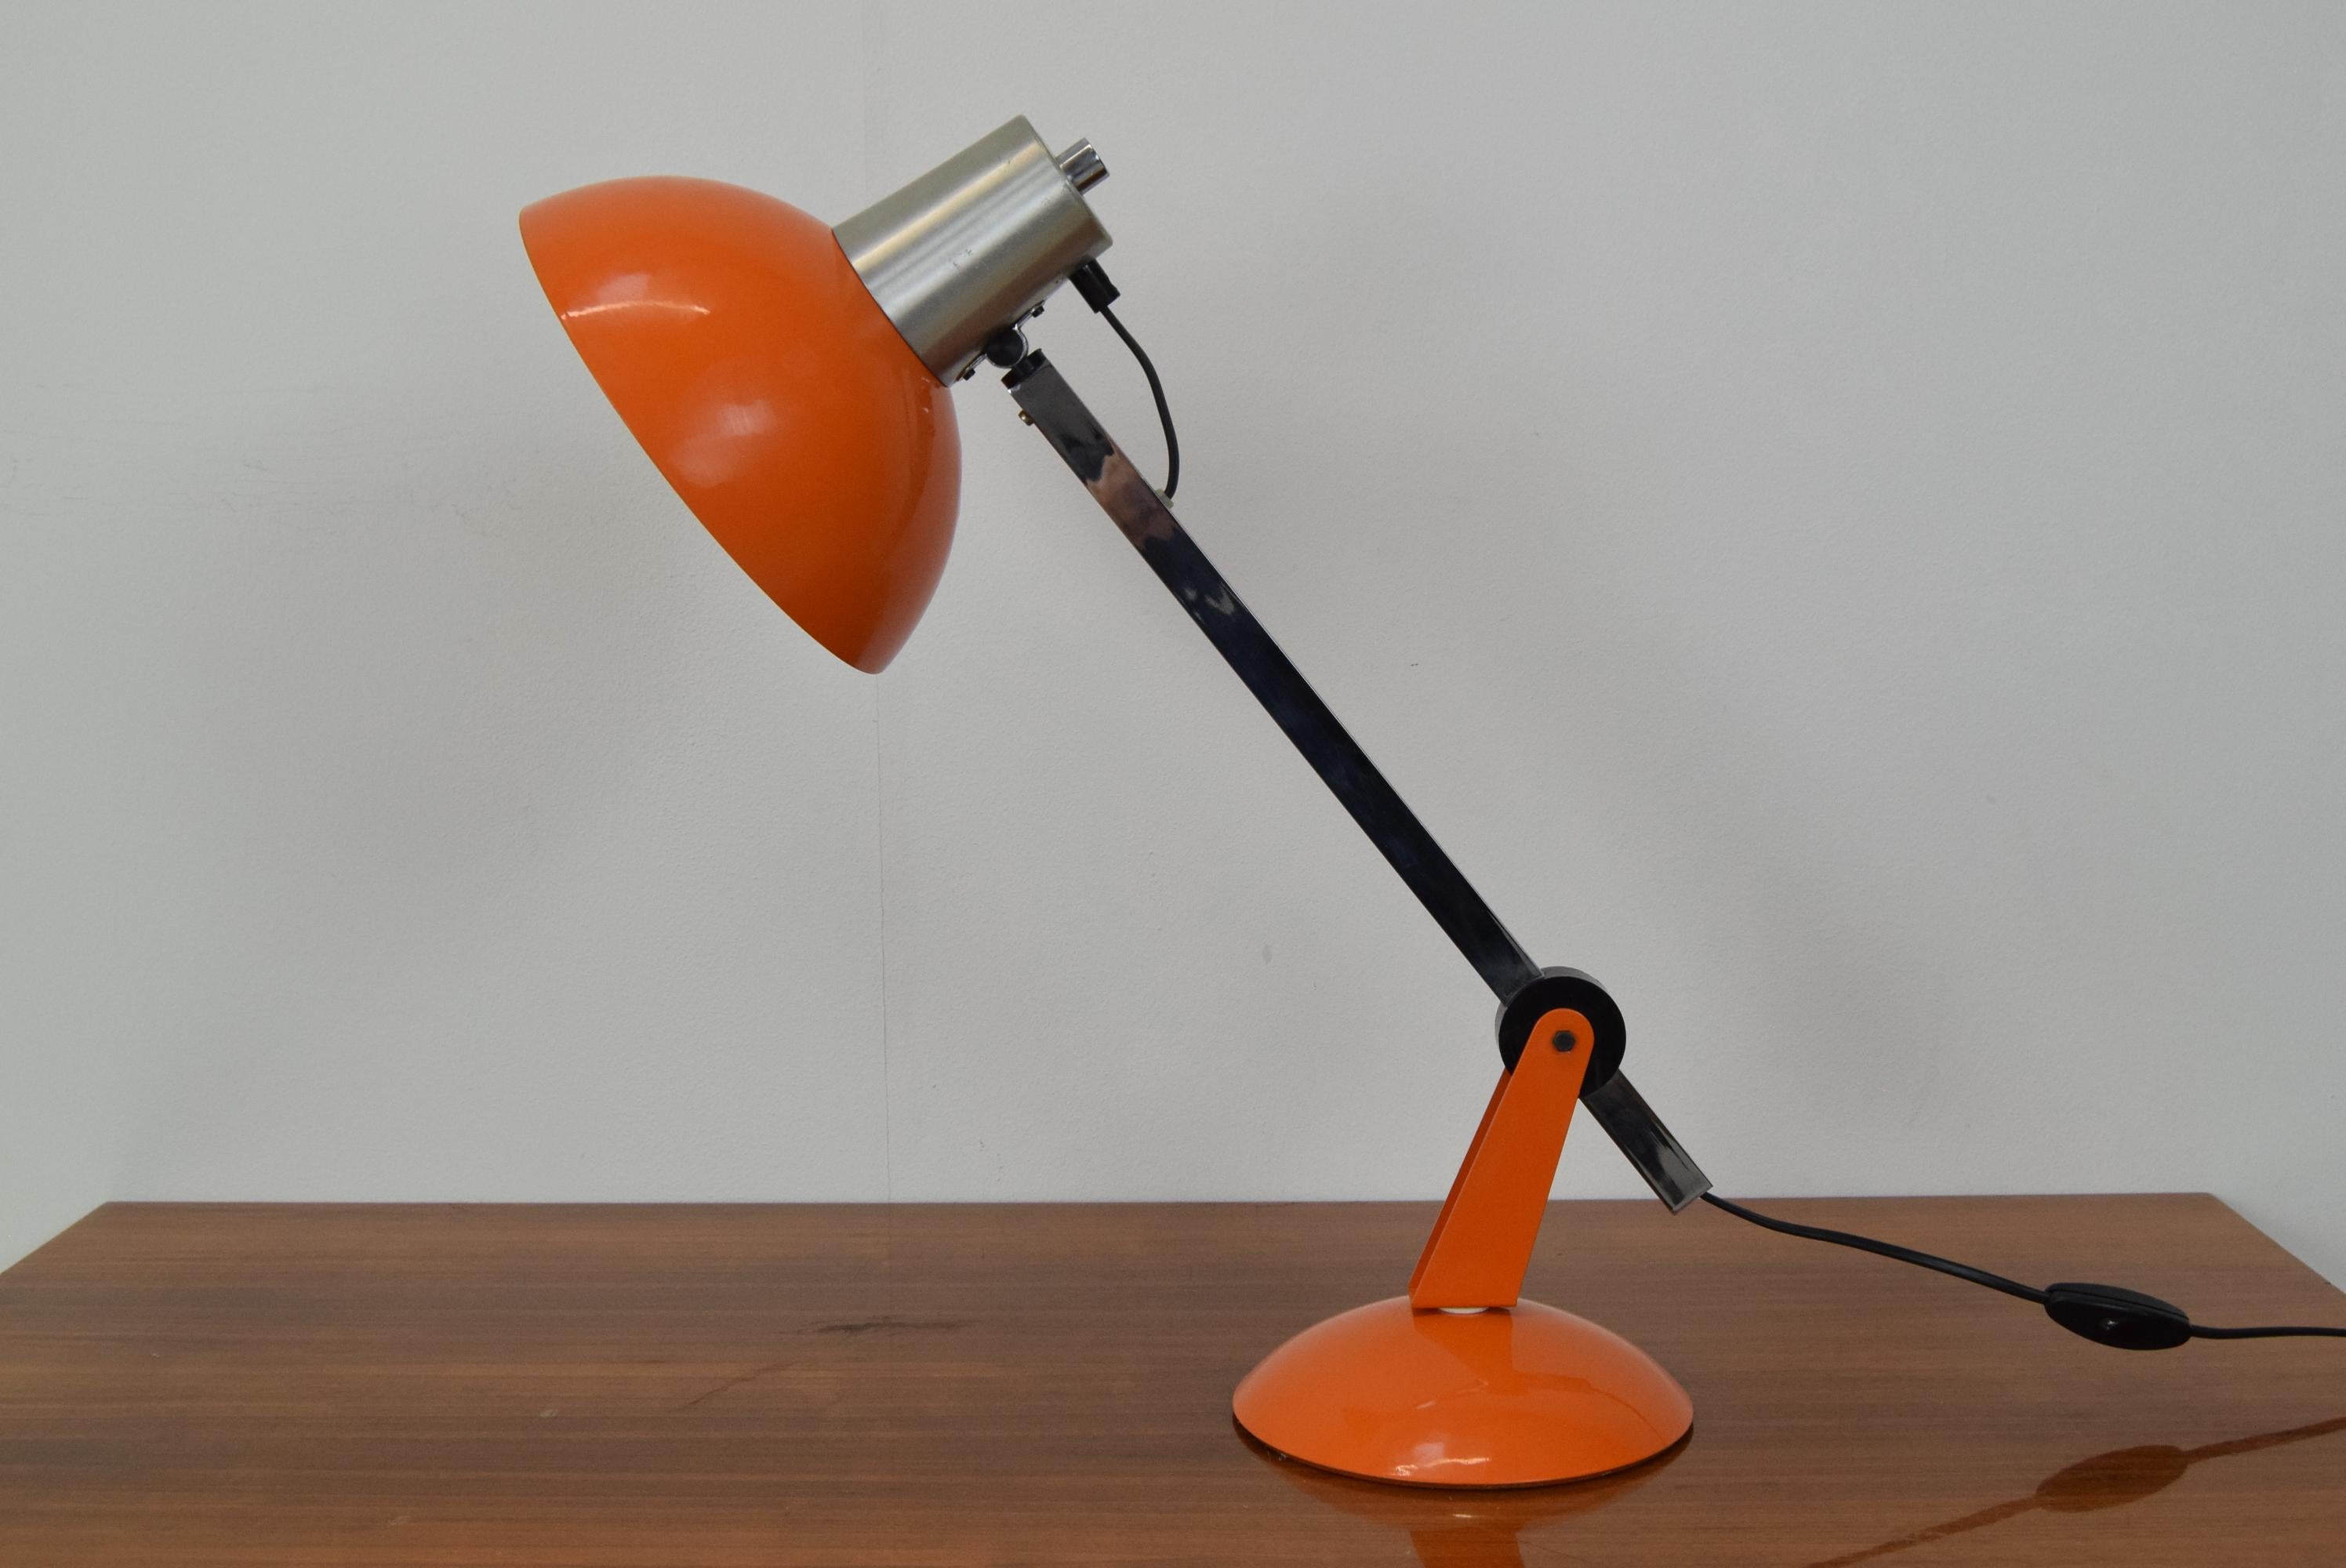 Made in germany
The shade is adjustable and rotation
The shade is slightly damaged
With aged patina
New cabling
1xE27 or E26 bulb
Original condition
US adapter included